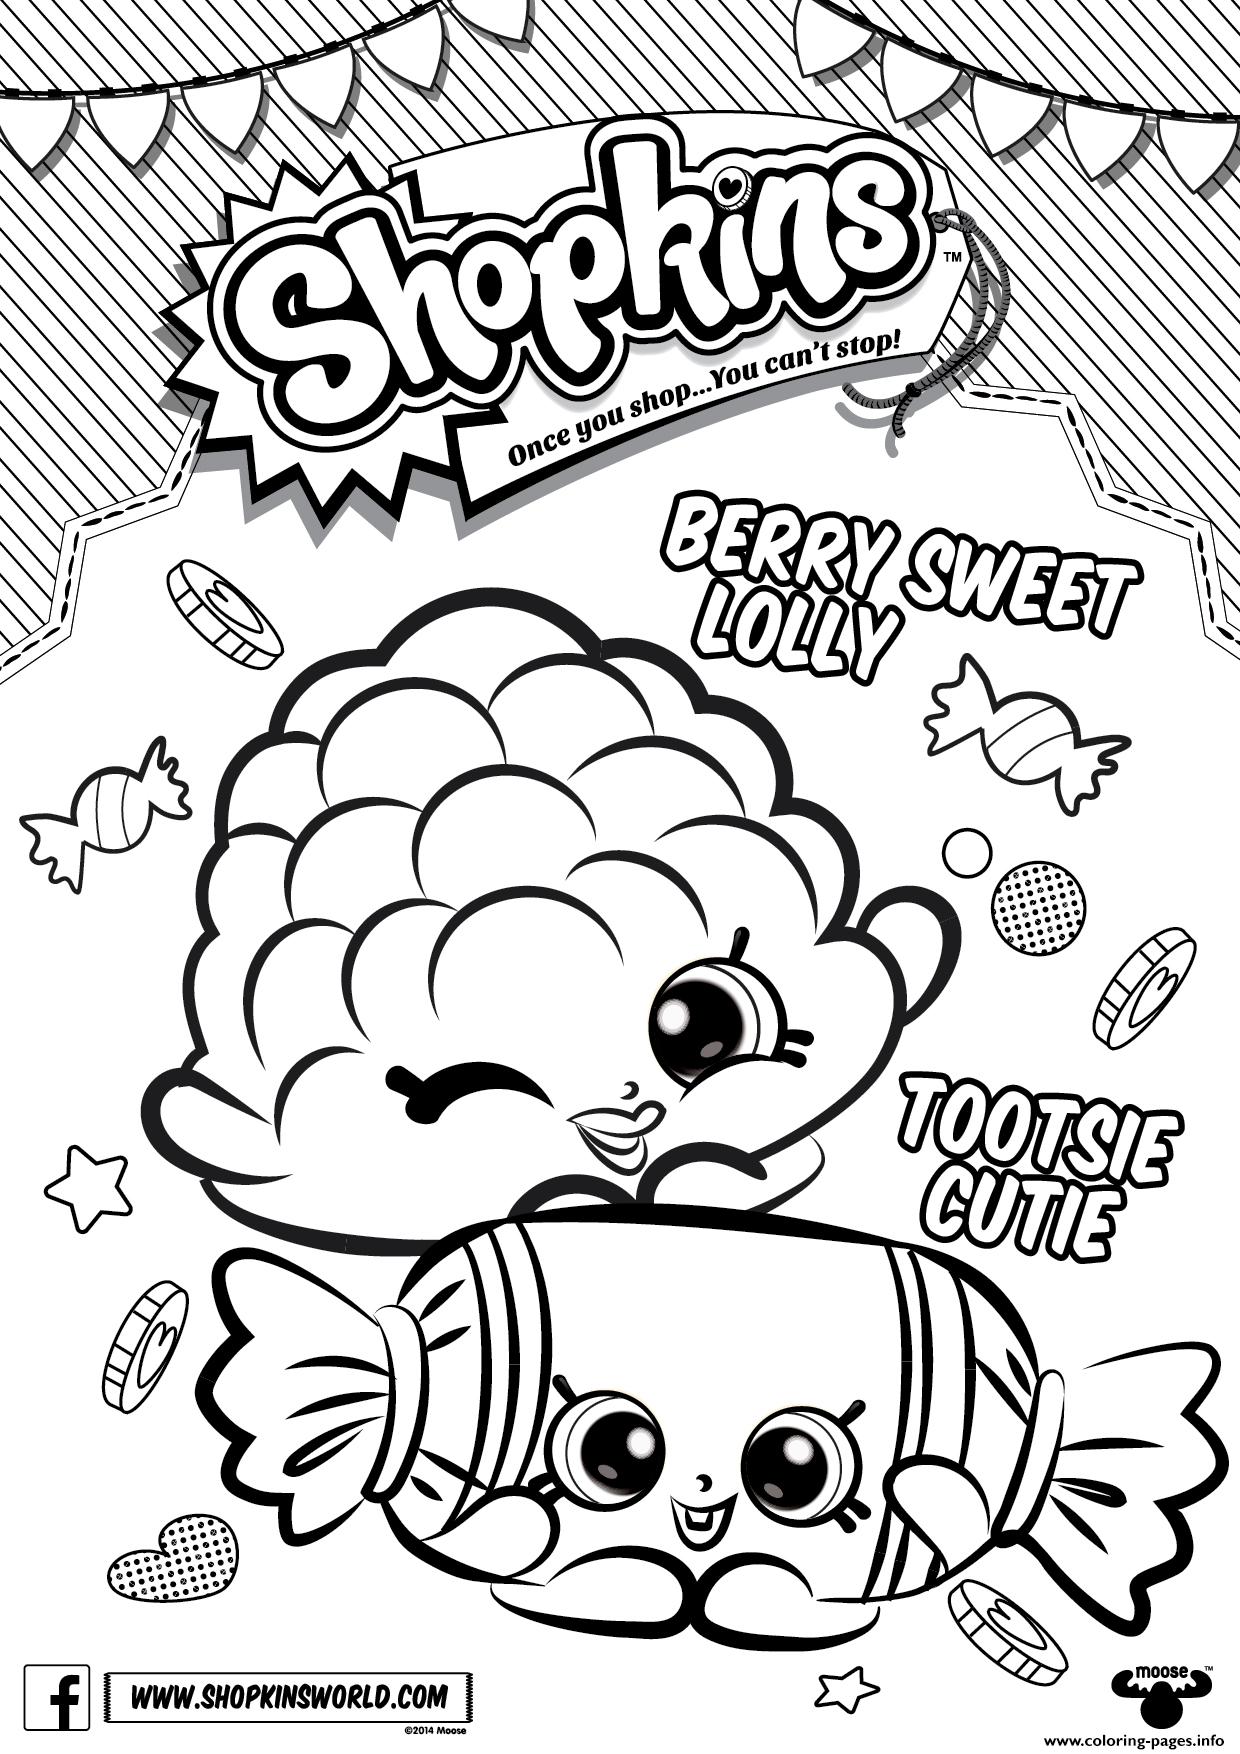 Shopkins Berry Sweet Lolly coloring